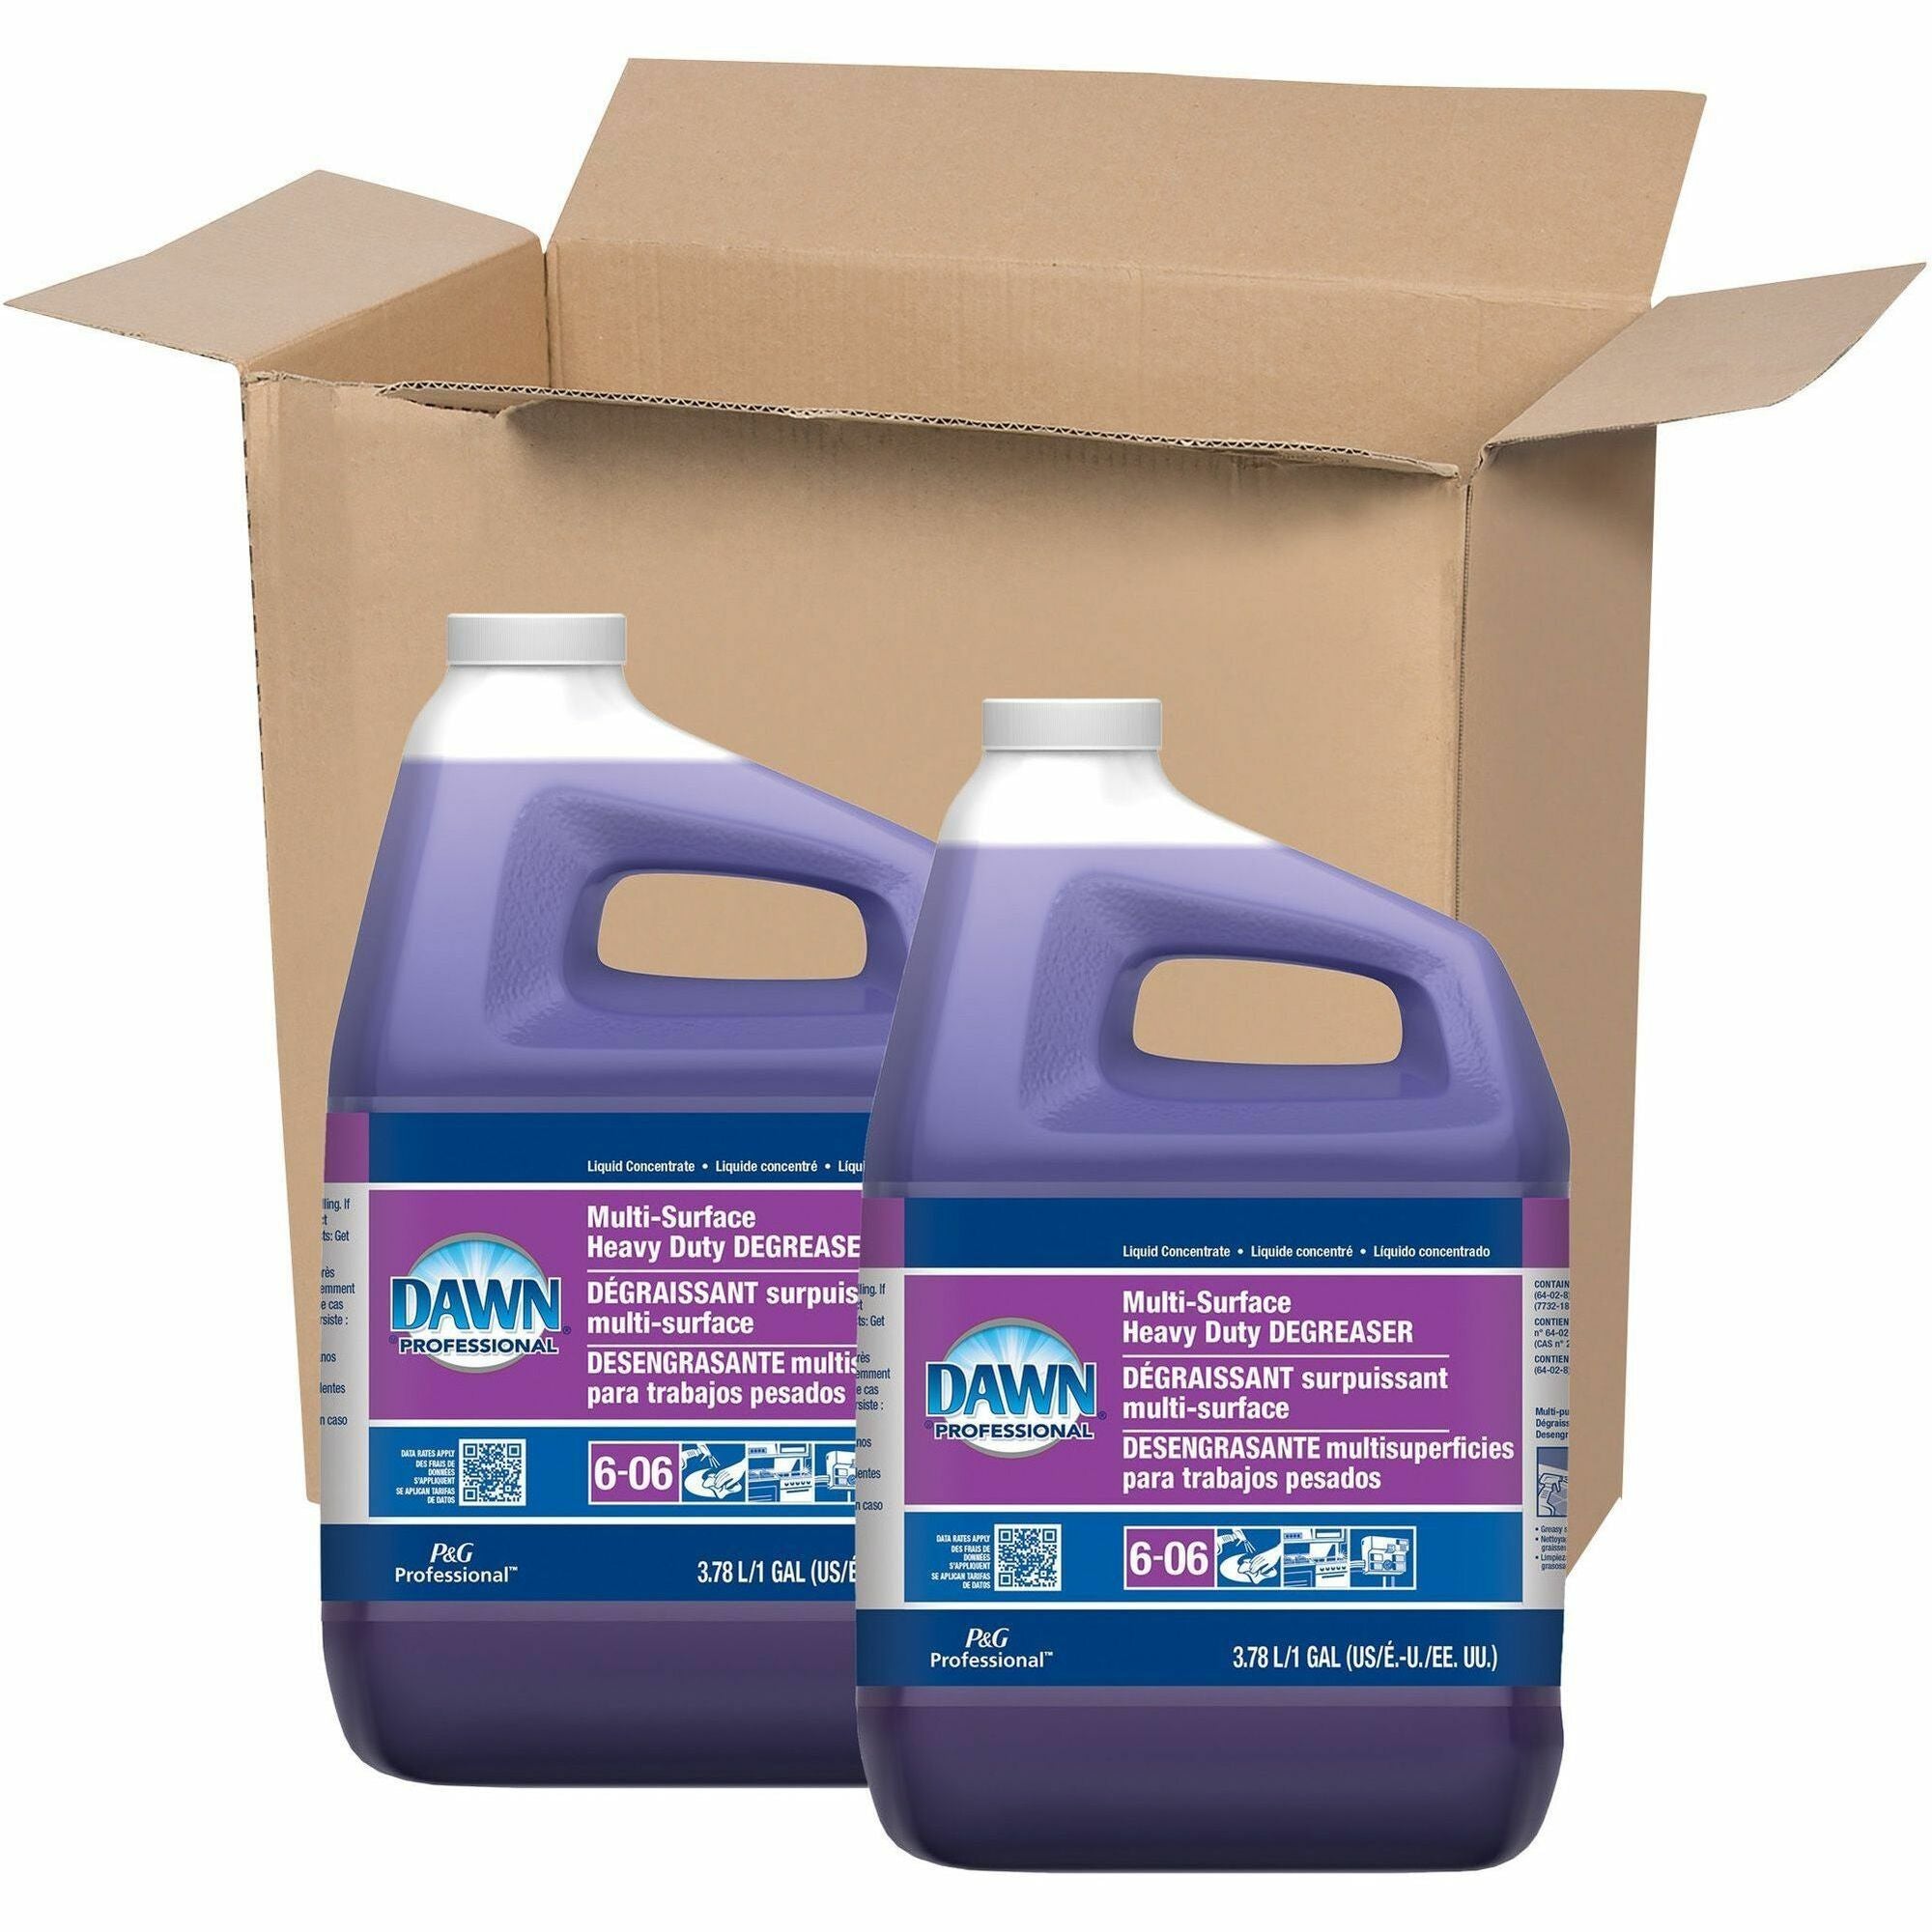 dawn-professional-heavy-duty-degreaser-ready-to-use-128-fl-oz-4-quart-2-carton-heavy-duty-caustic-free-non-flammable-phosphate-free-purple_pgc14494 - 1